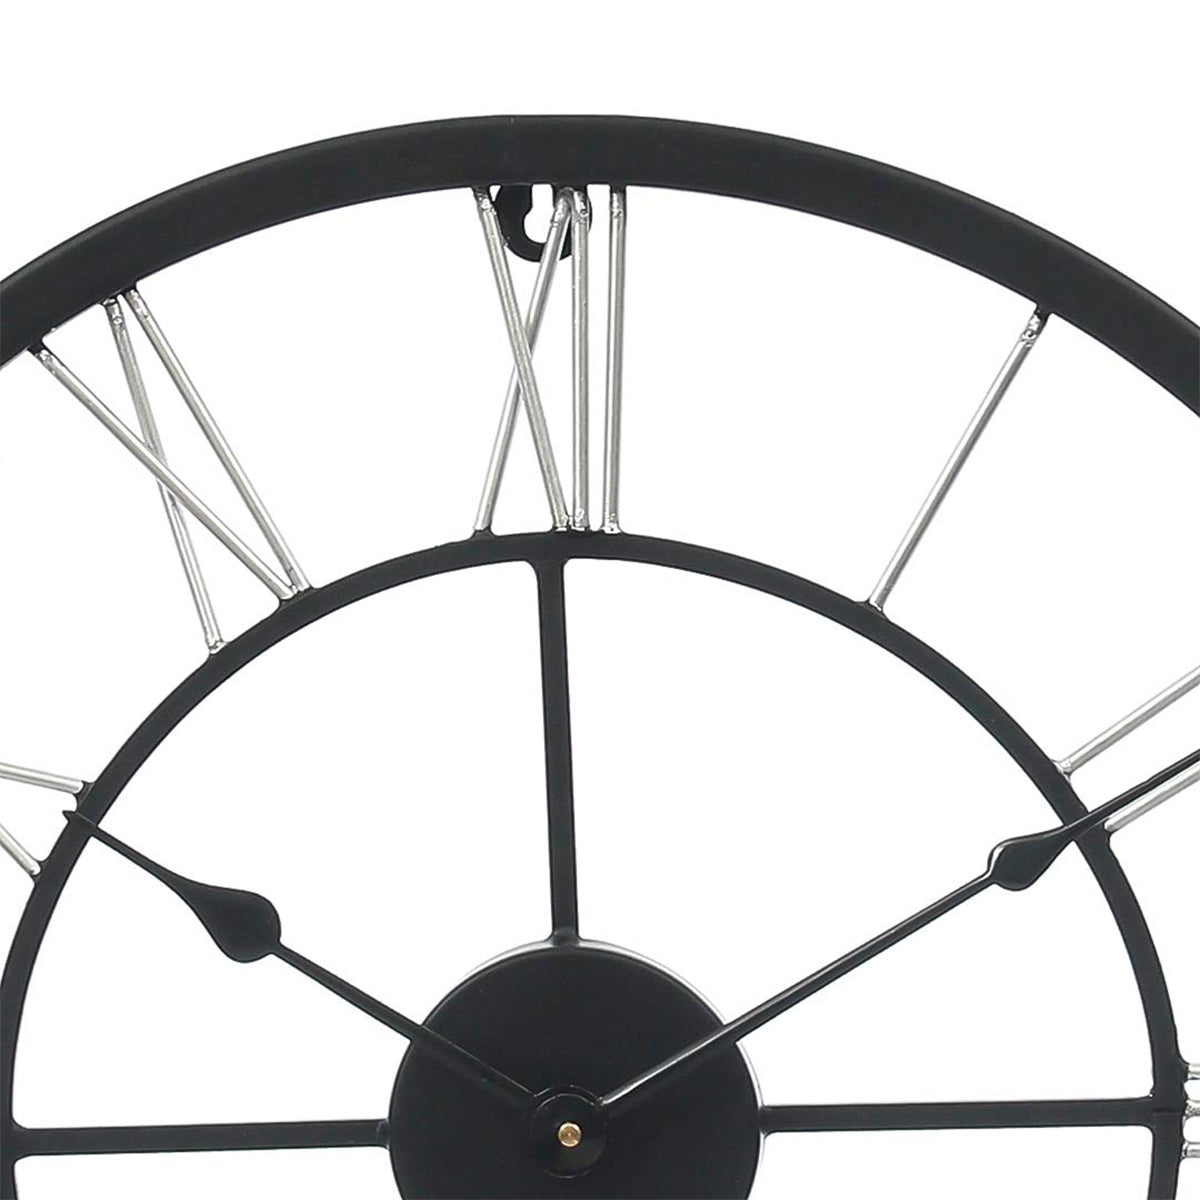 Round Black Handcrafted Roman Numeral Designer Iron Wall Hanging Clock 5